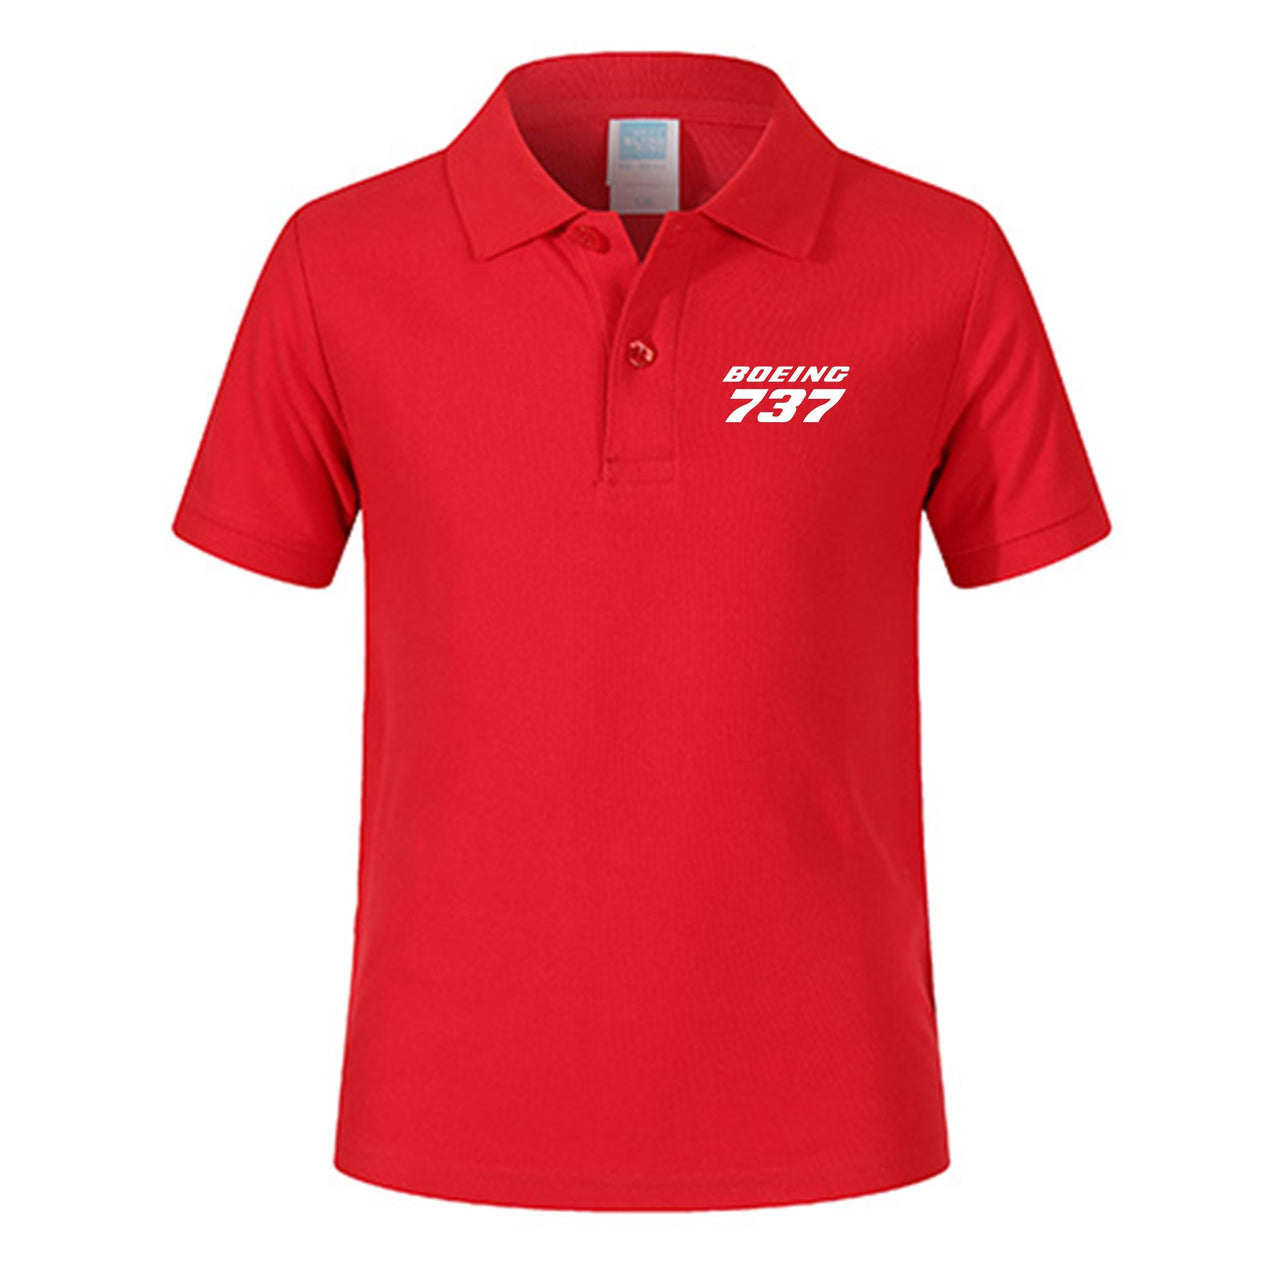 Boeing 737 & Text Designed Children Polo T-Shirts